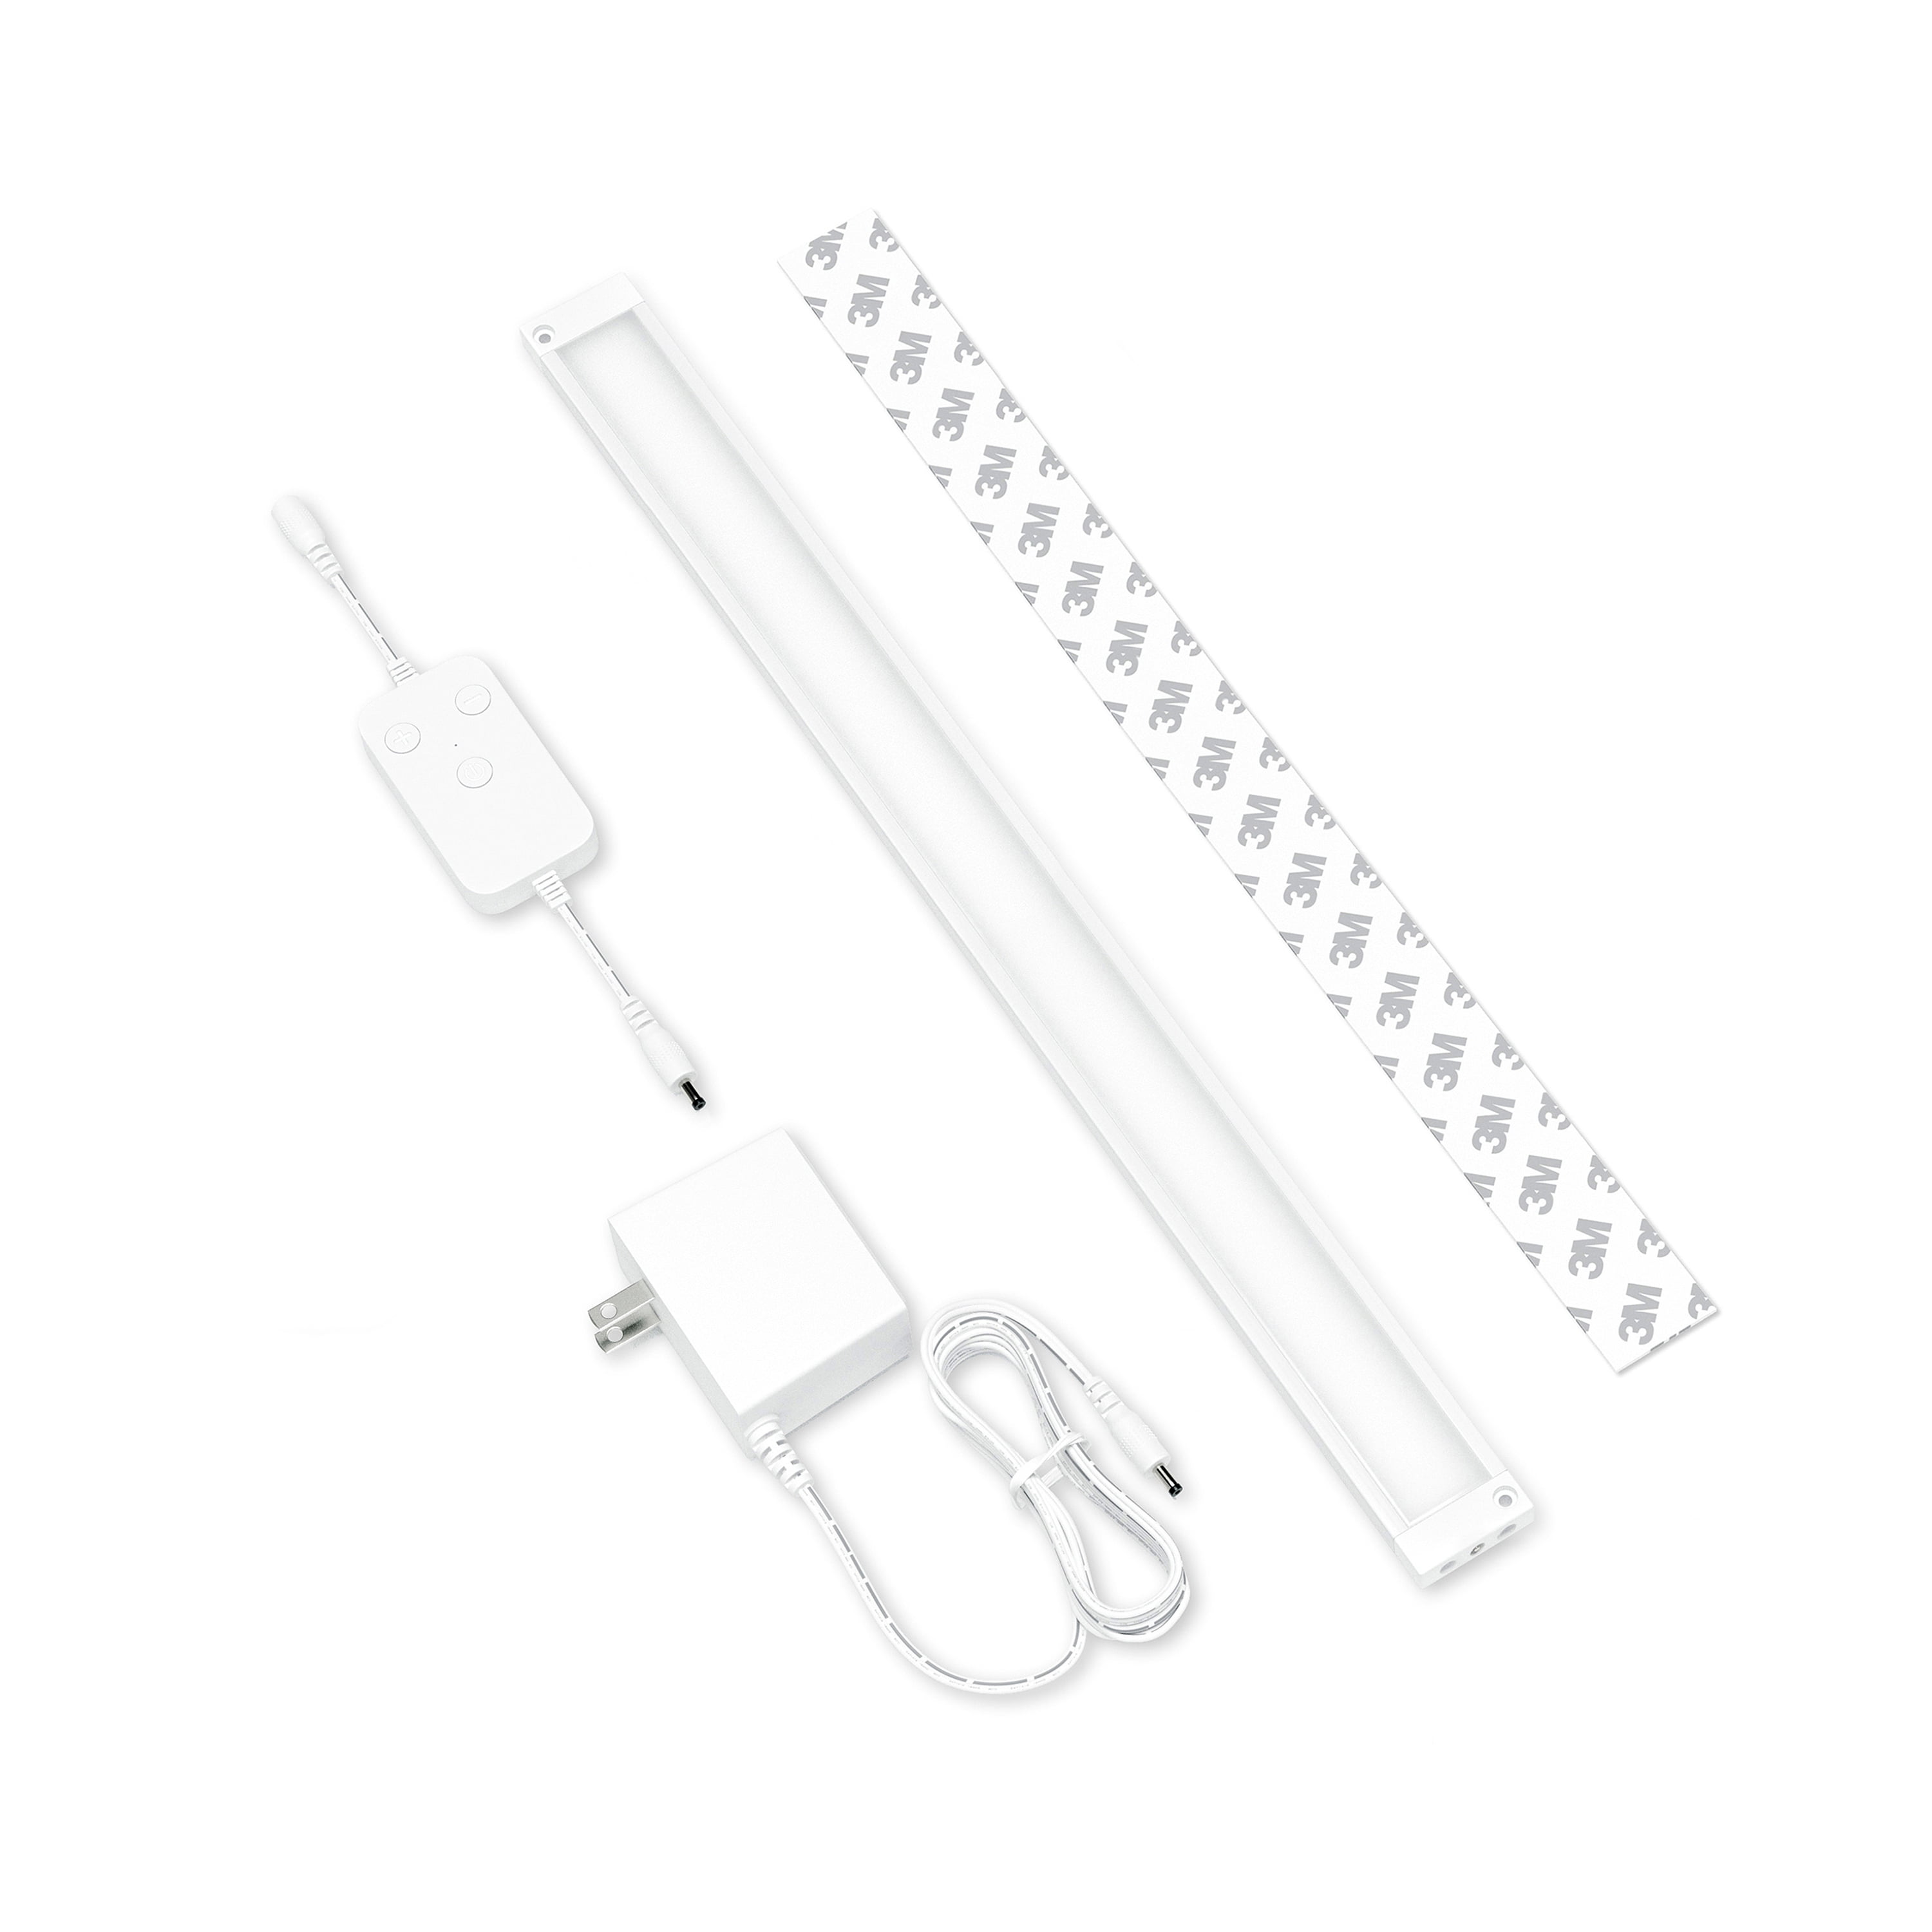 Esyexpress Online Plastic LED Lights With Wireless Remote Control Hot  (White) - Set Of 3, 15 W